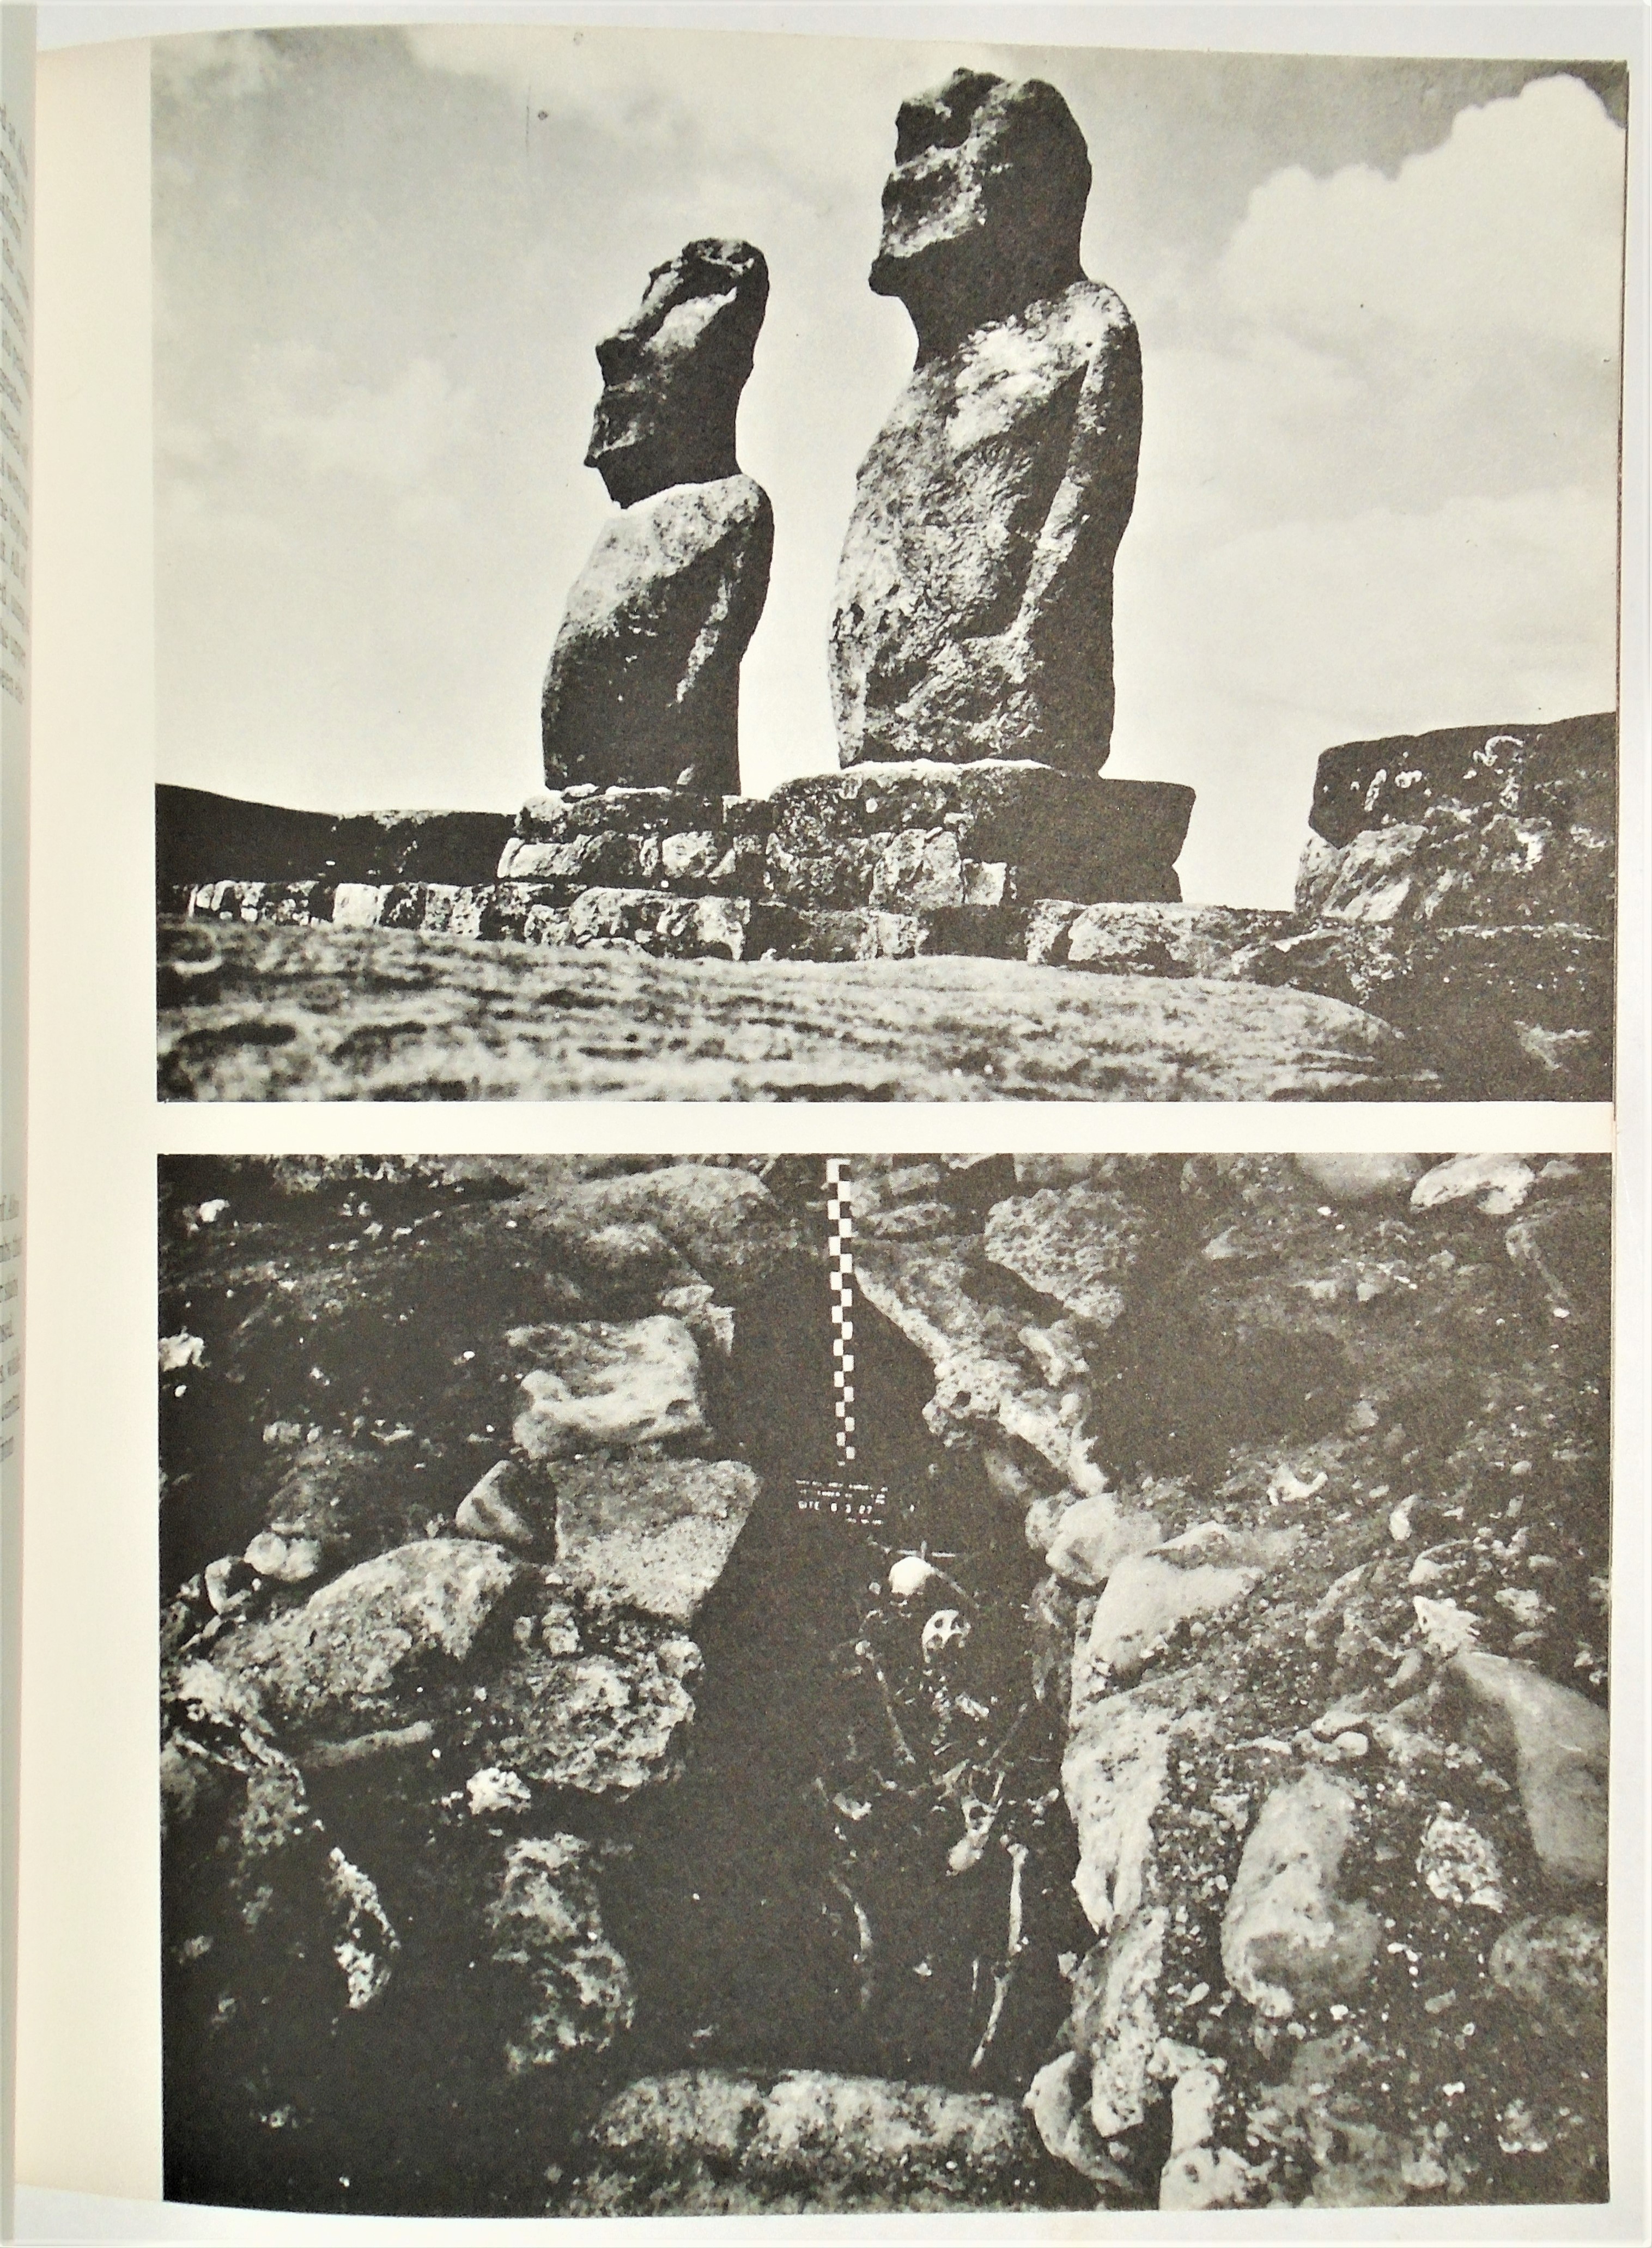 William Mulloy - Preliminary report of the restoration of ahu vai uri easter island